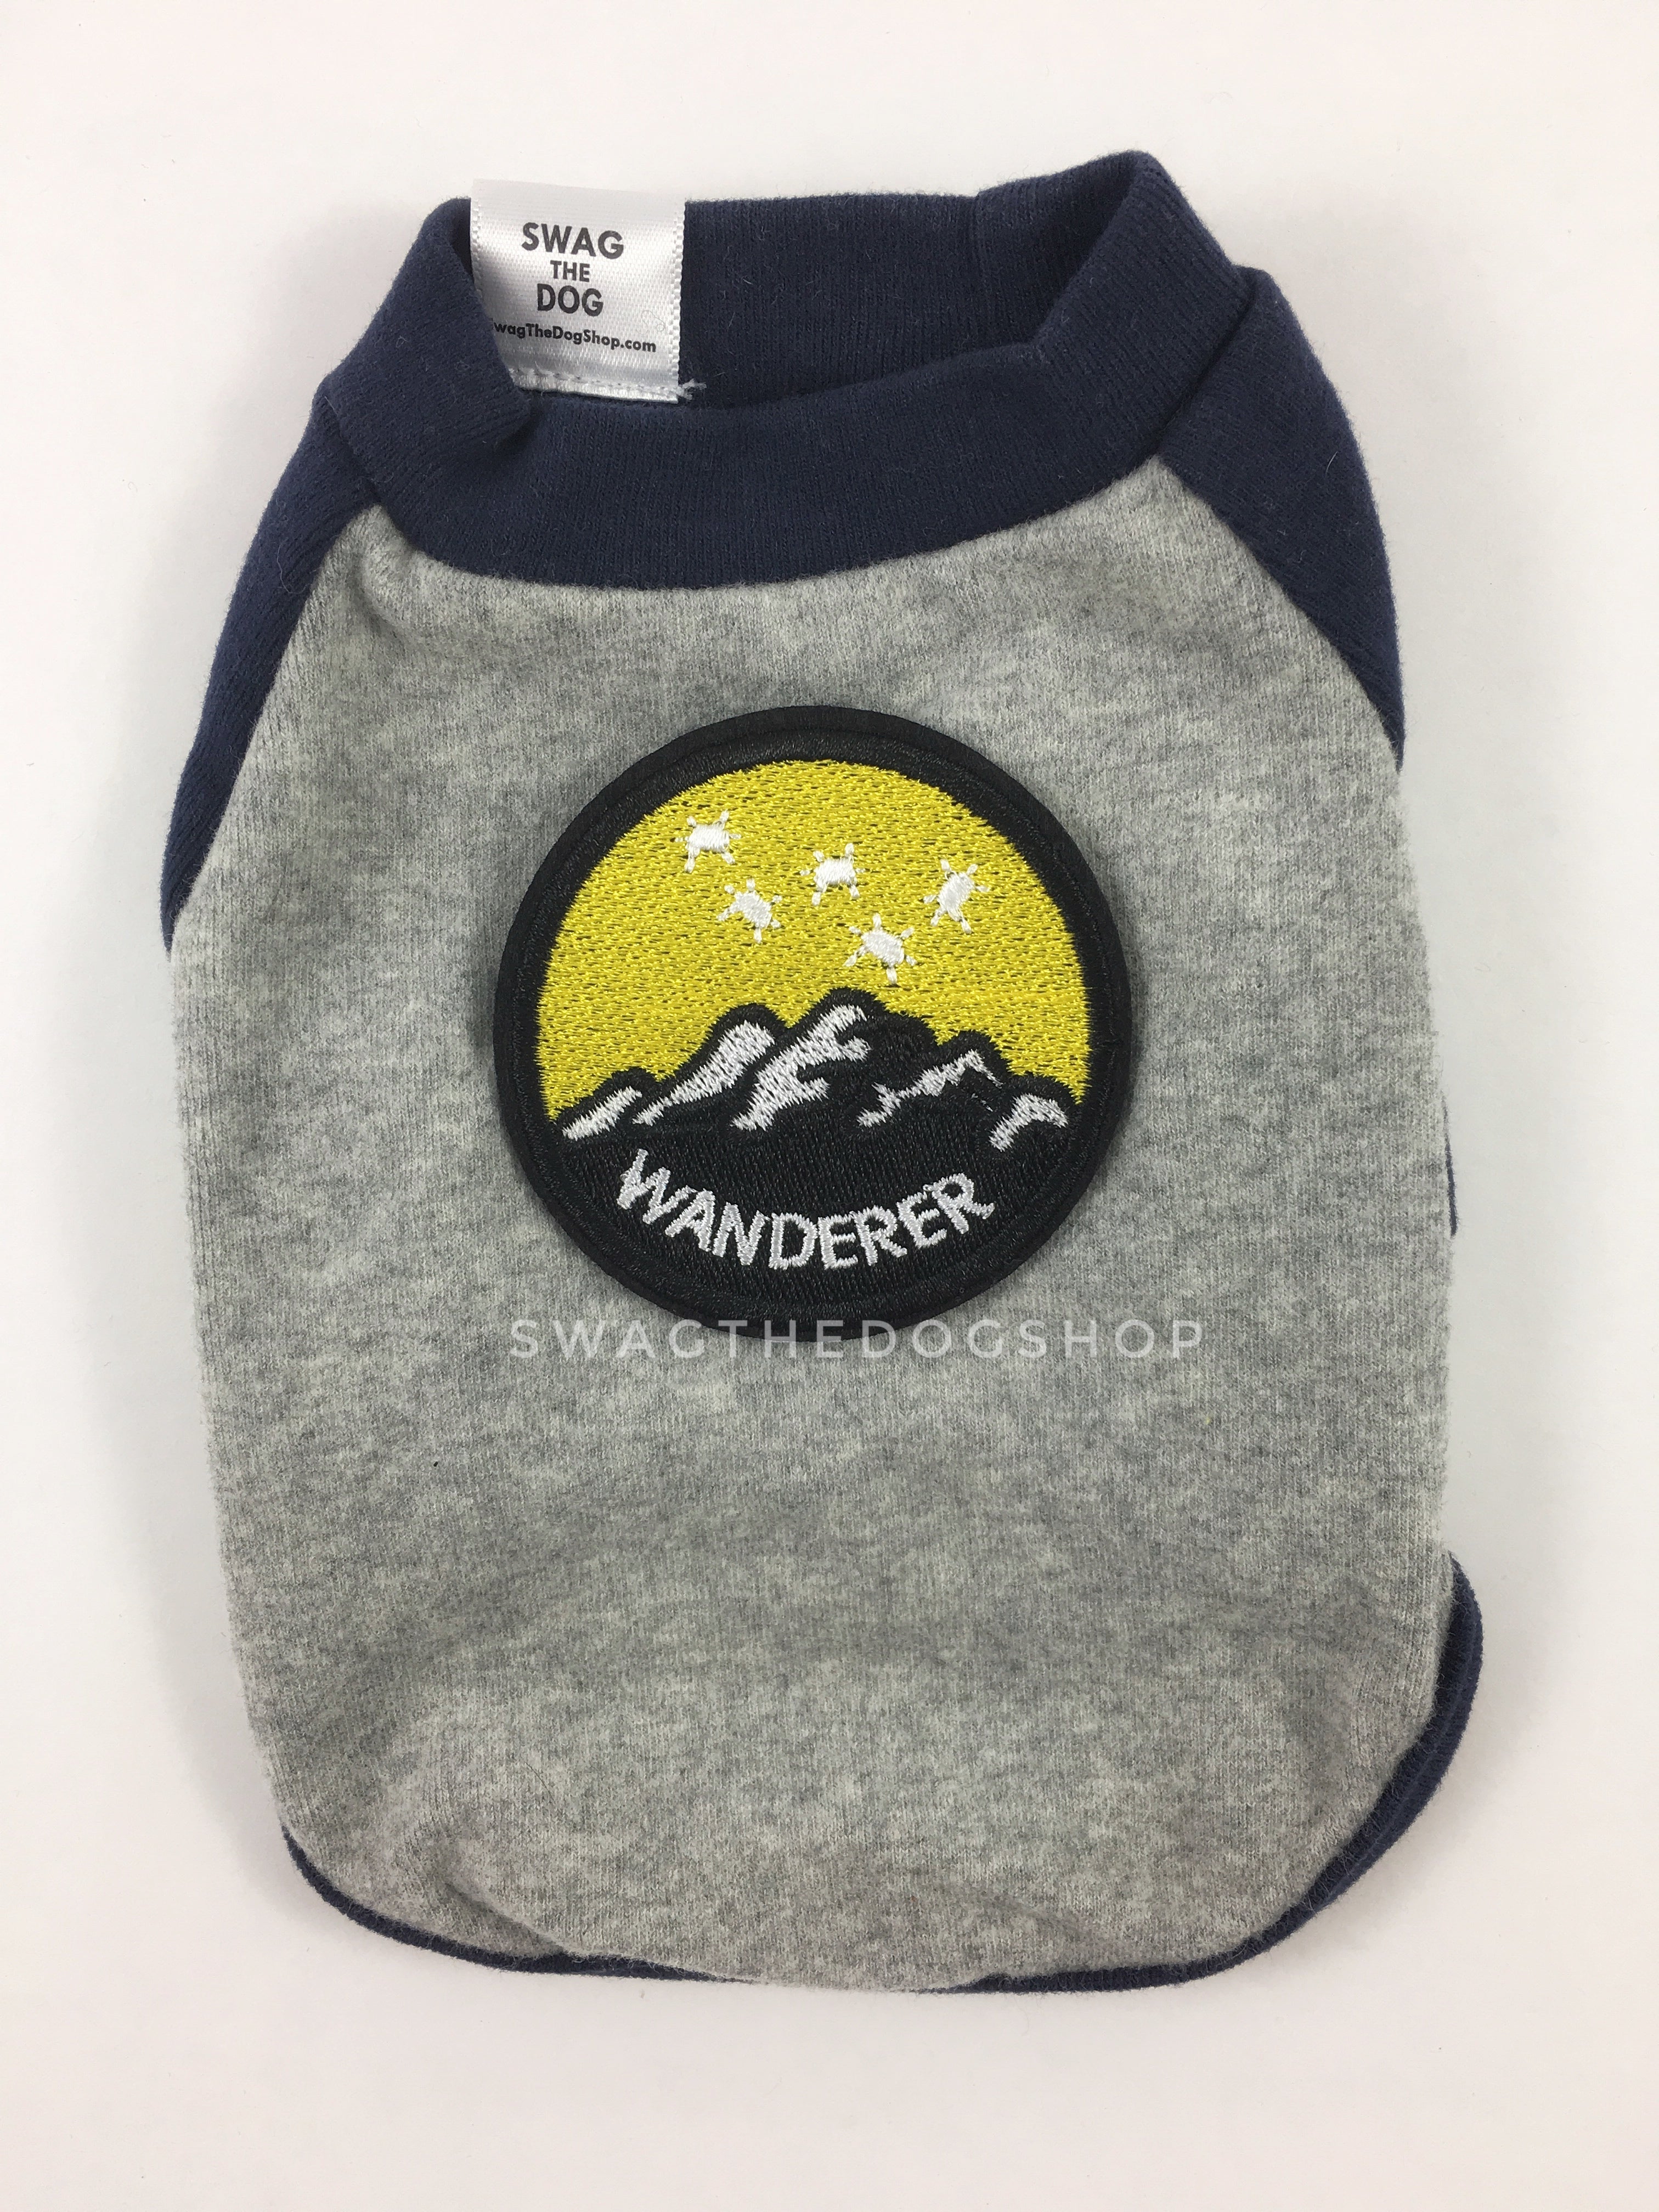 Navy and Gray Centerfield Tees T-Shirt - Patch Option of Wanderer. Navy and Gray T-Shirt